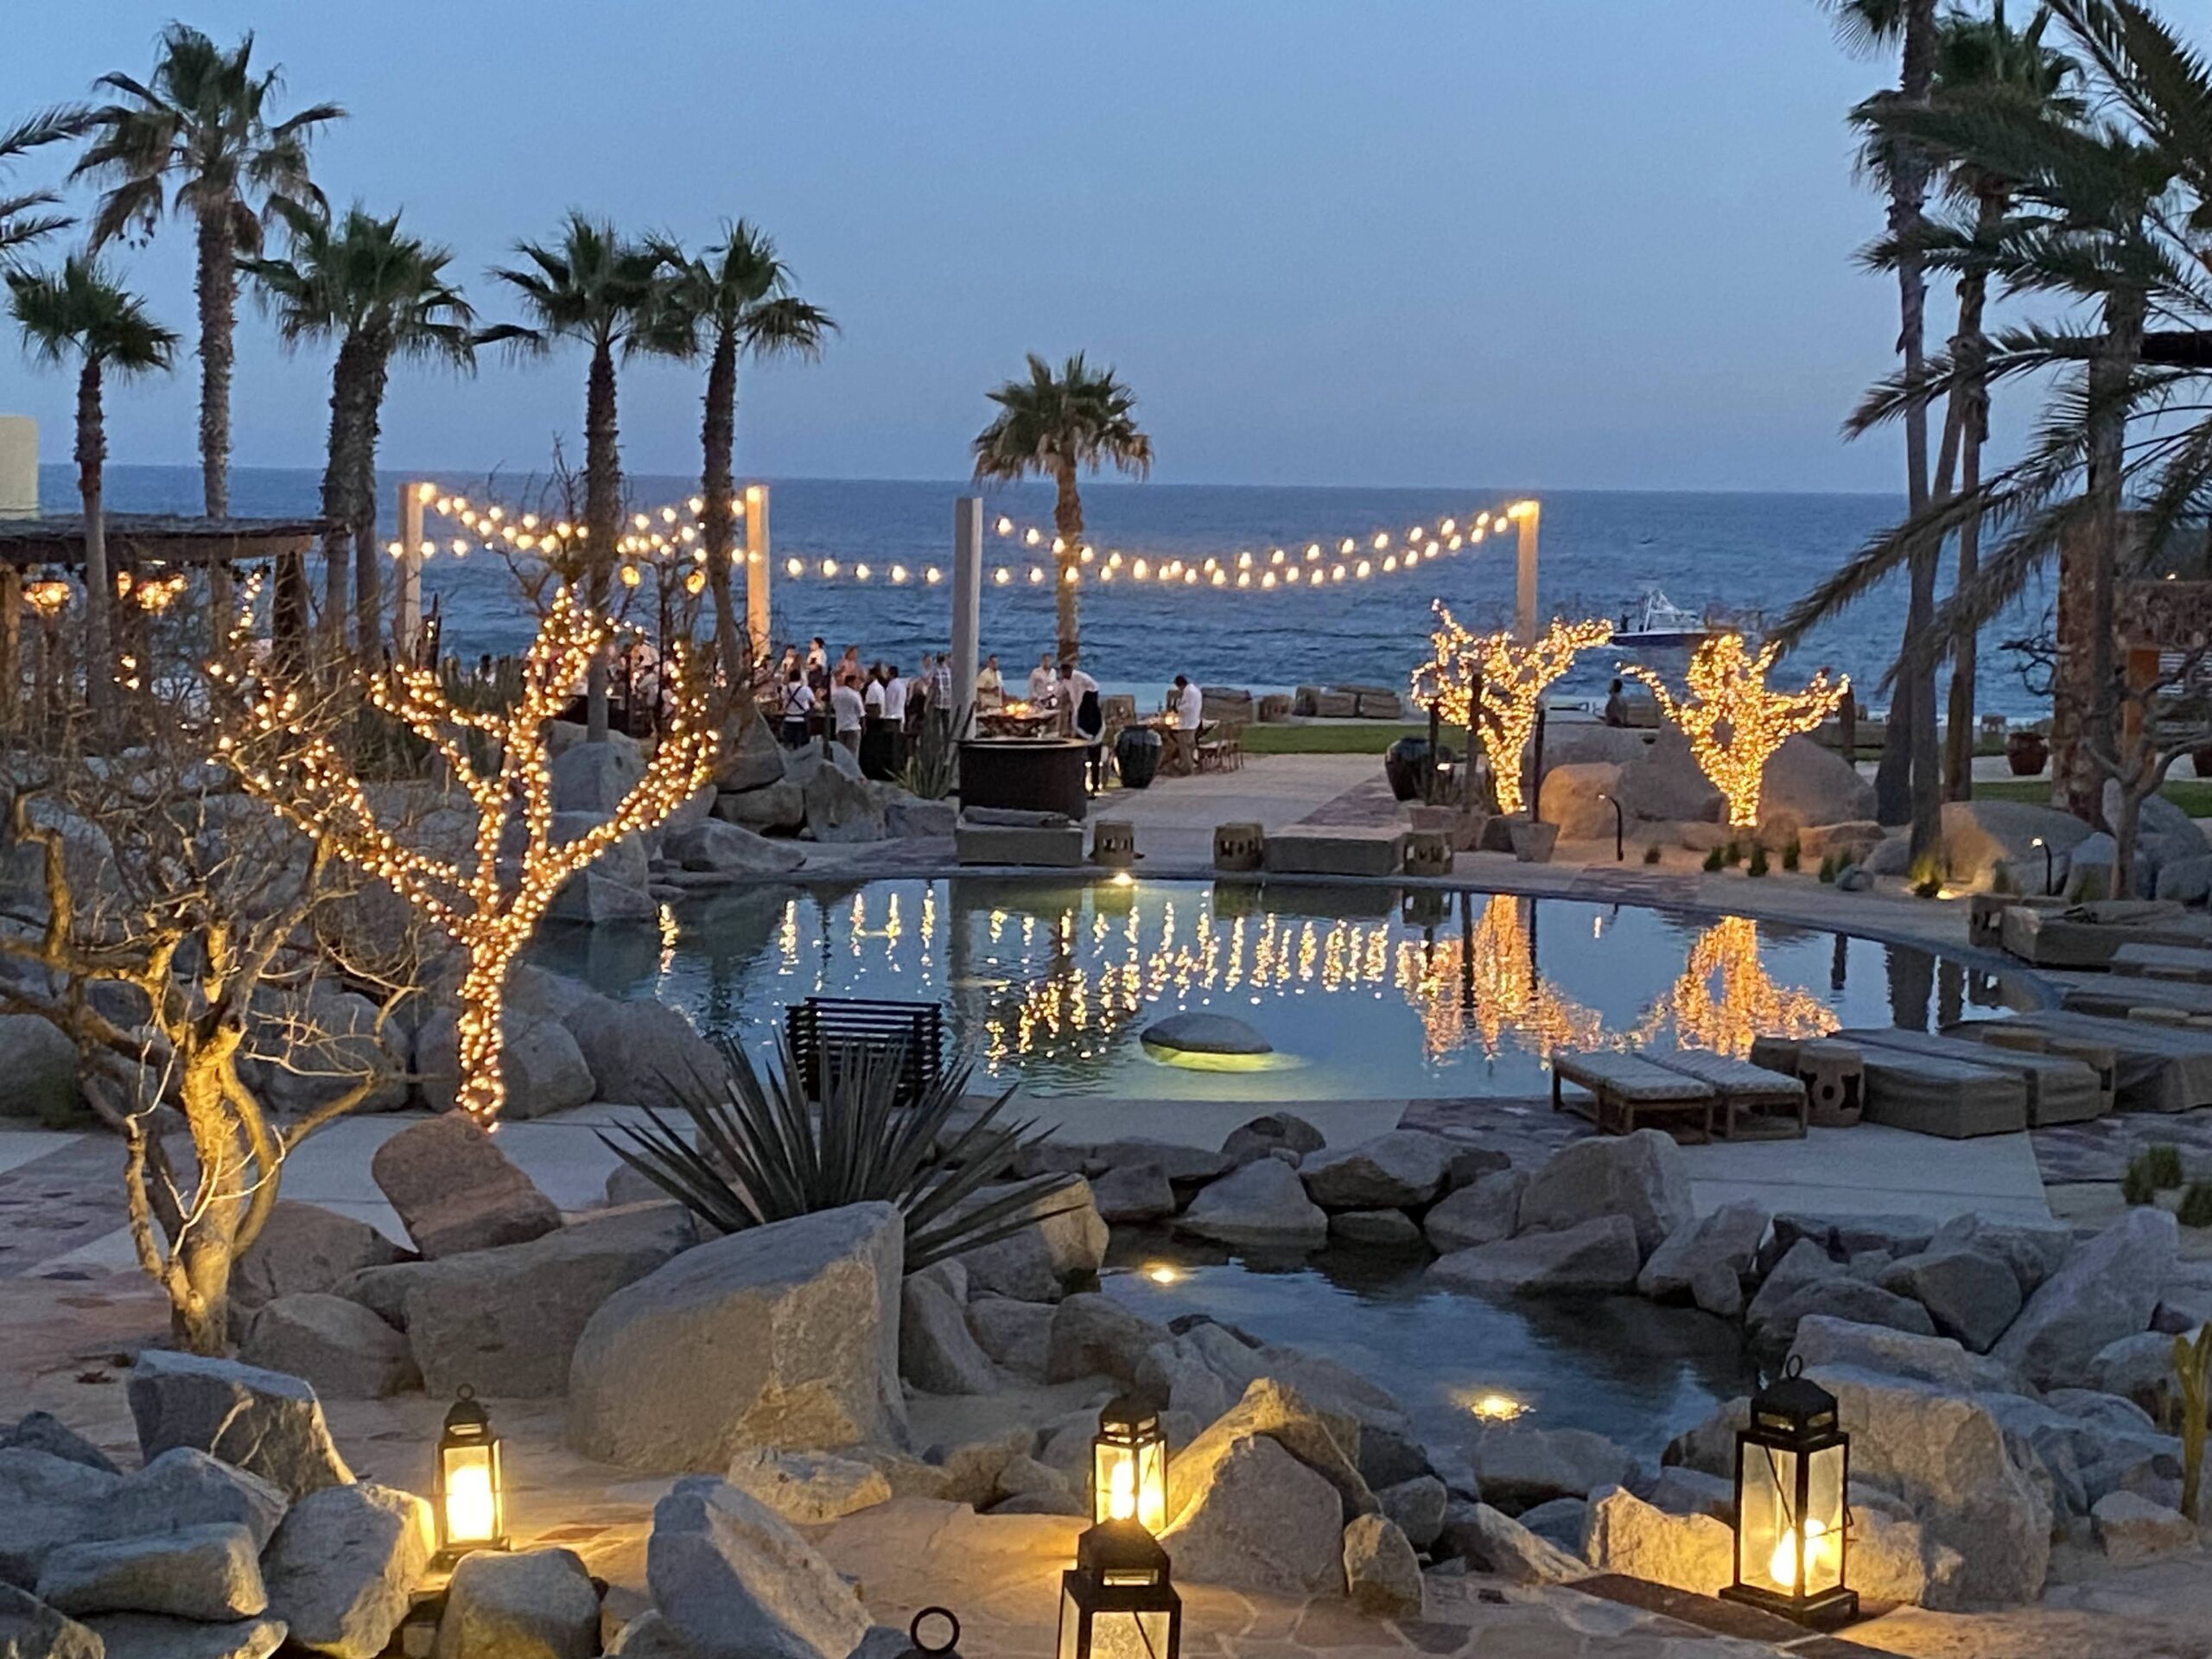 a pool with lights and palm trees and people in the background